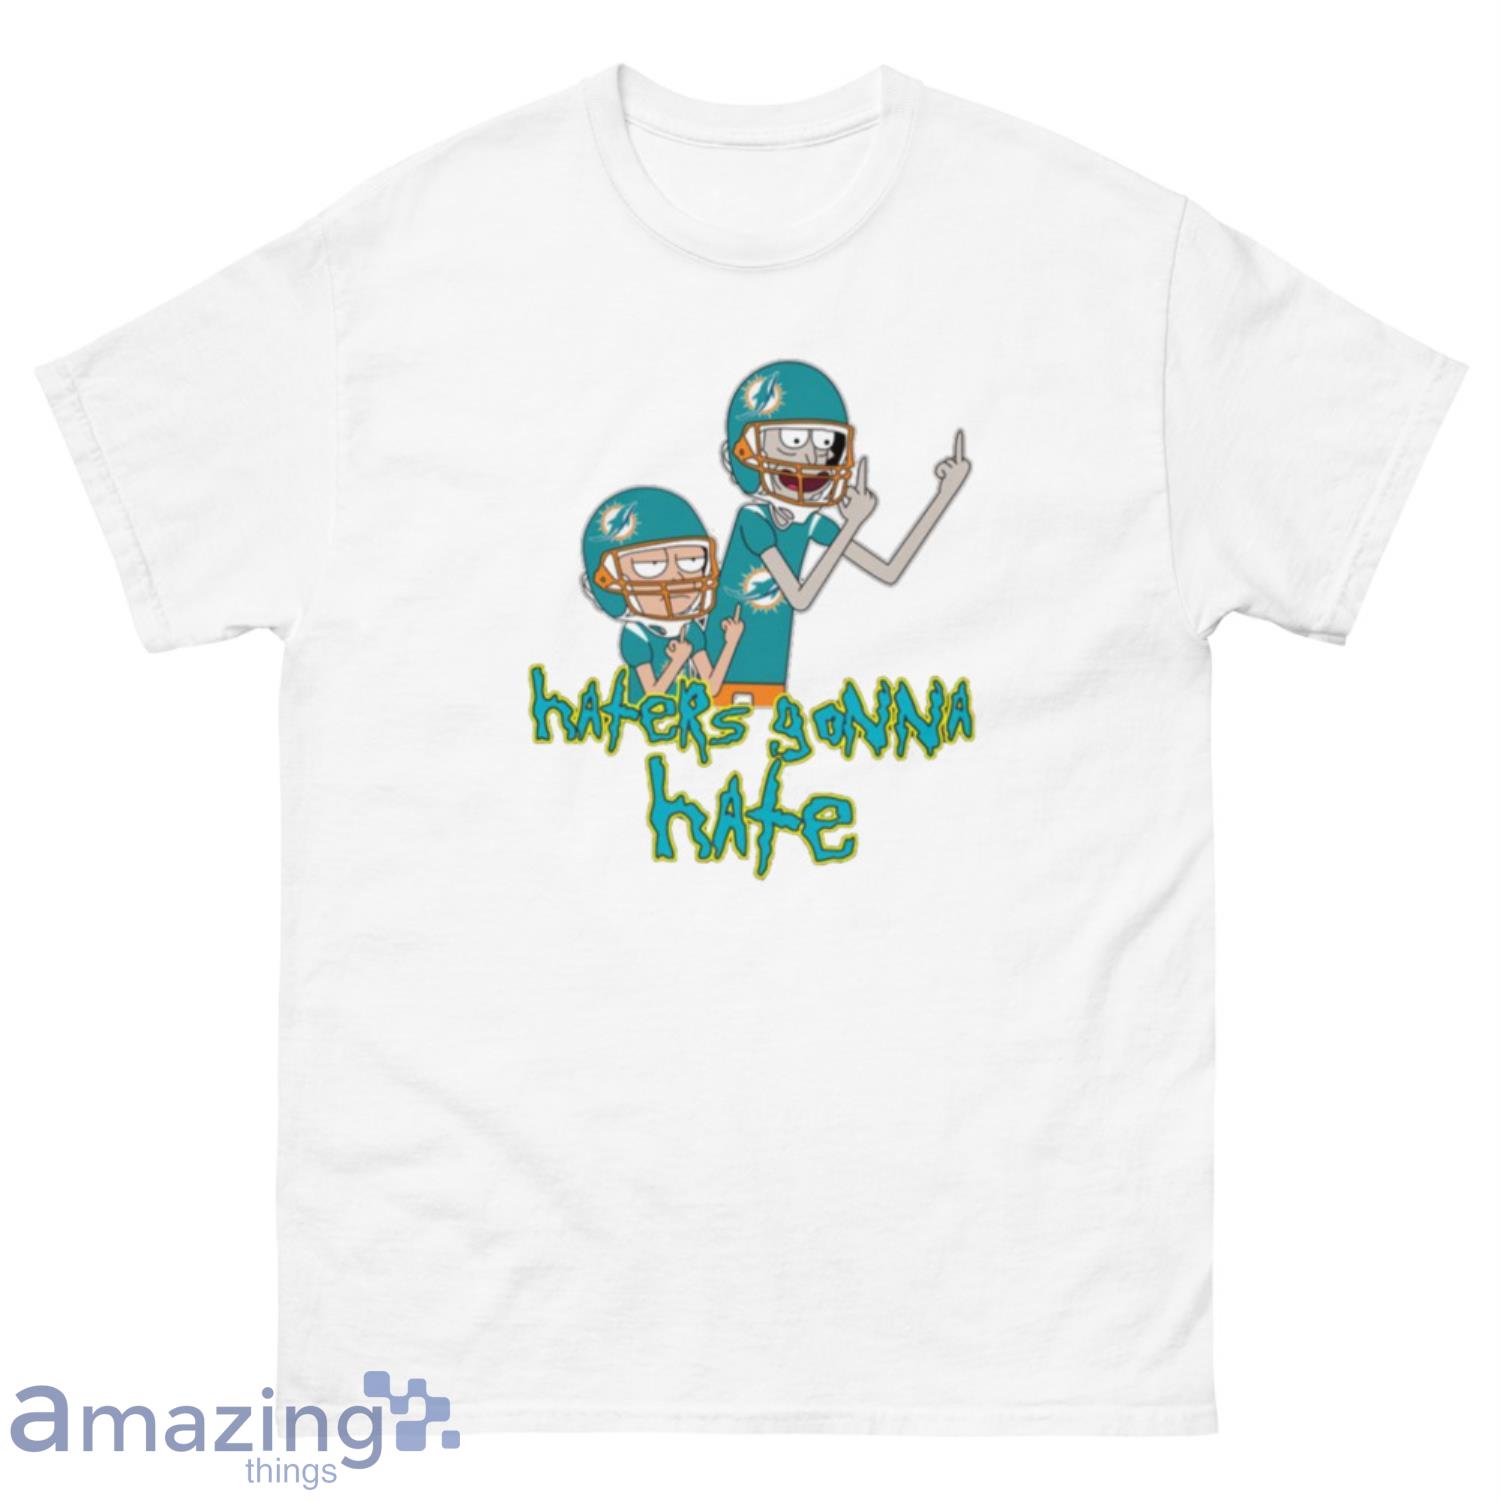 NFL Miami Dolphins Football Rick And Morty Haters Gonna Hate T-Shirt Sweatshirt Hoodie - 500 Men’s Classic Tee Gildan-2